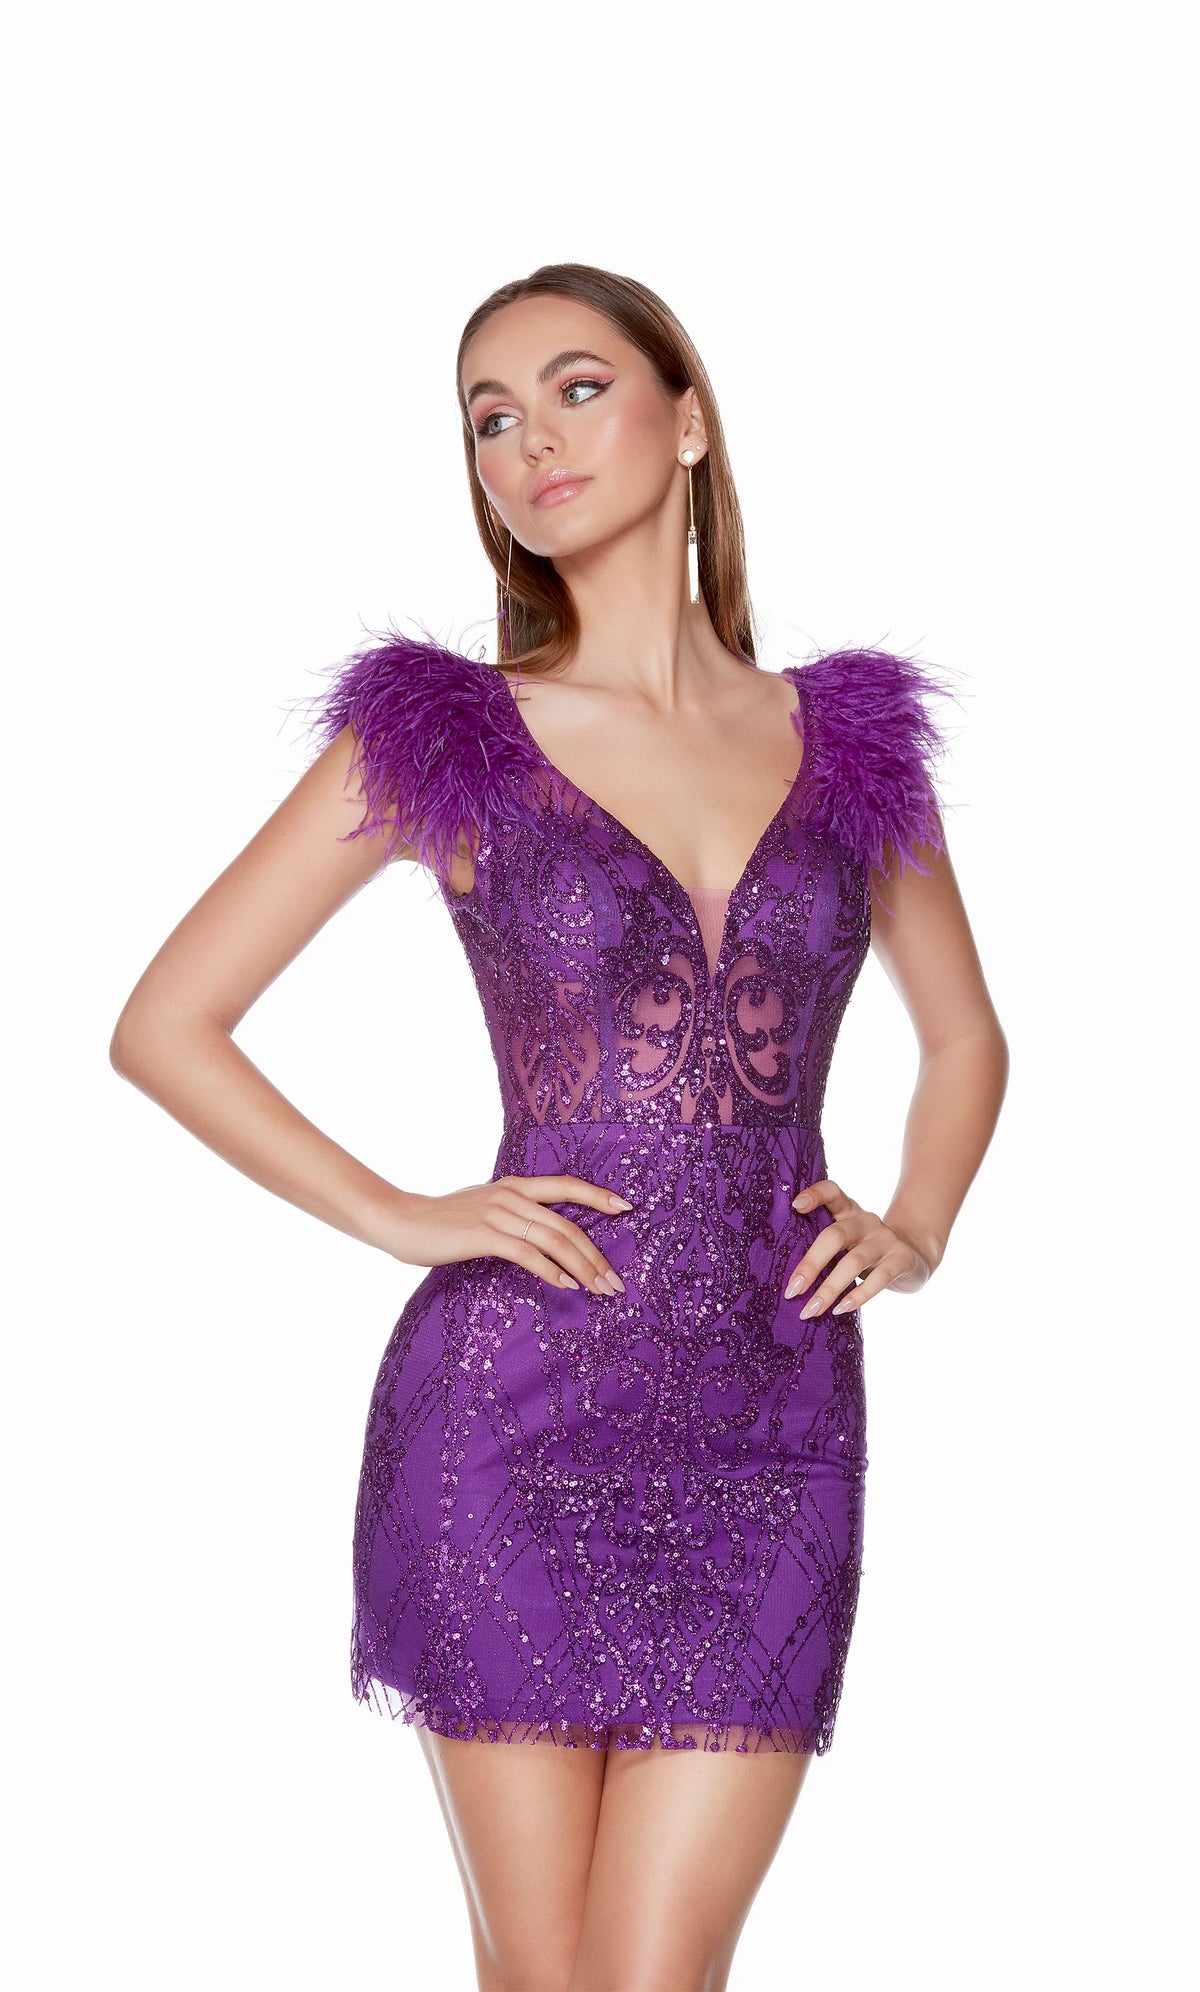 Short sequin mini dress with a plunging neckline, sheer bodice, and feather accents in bright purple.